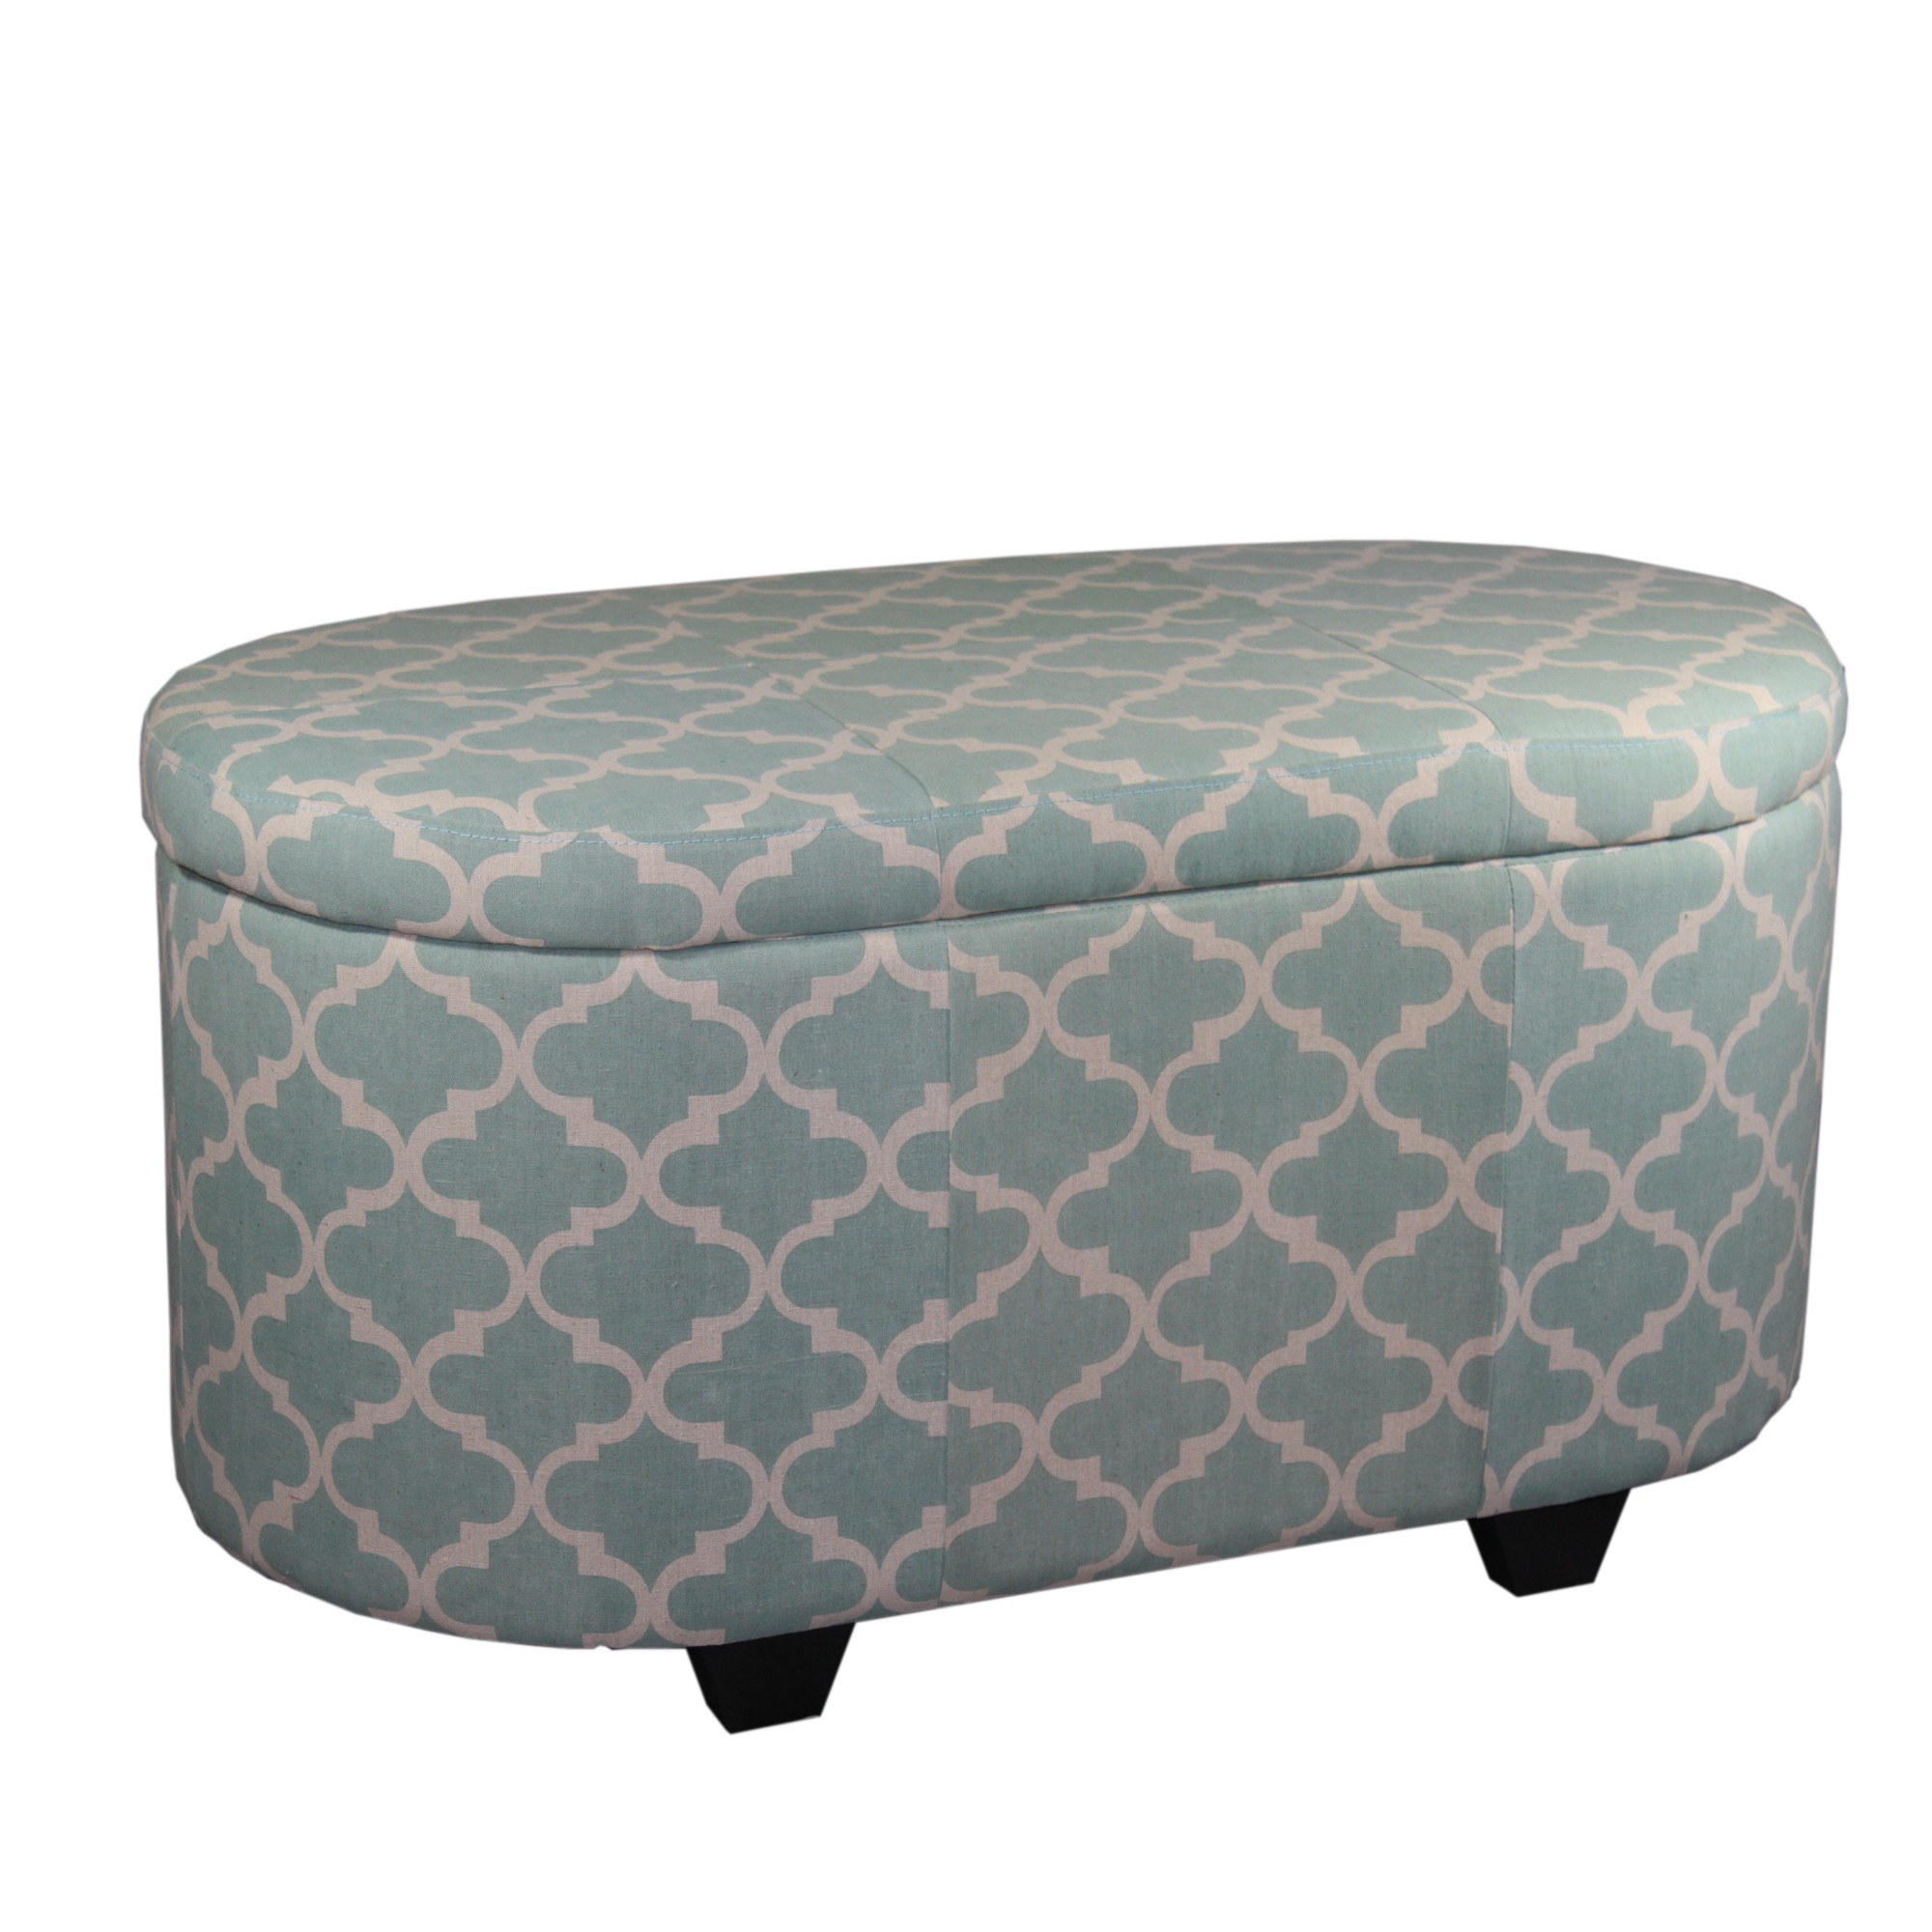 Teal and Cream Quatrefoil Oval Storage Bench